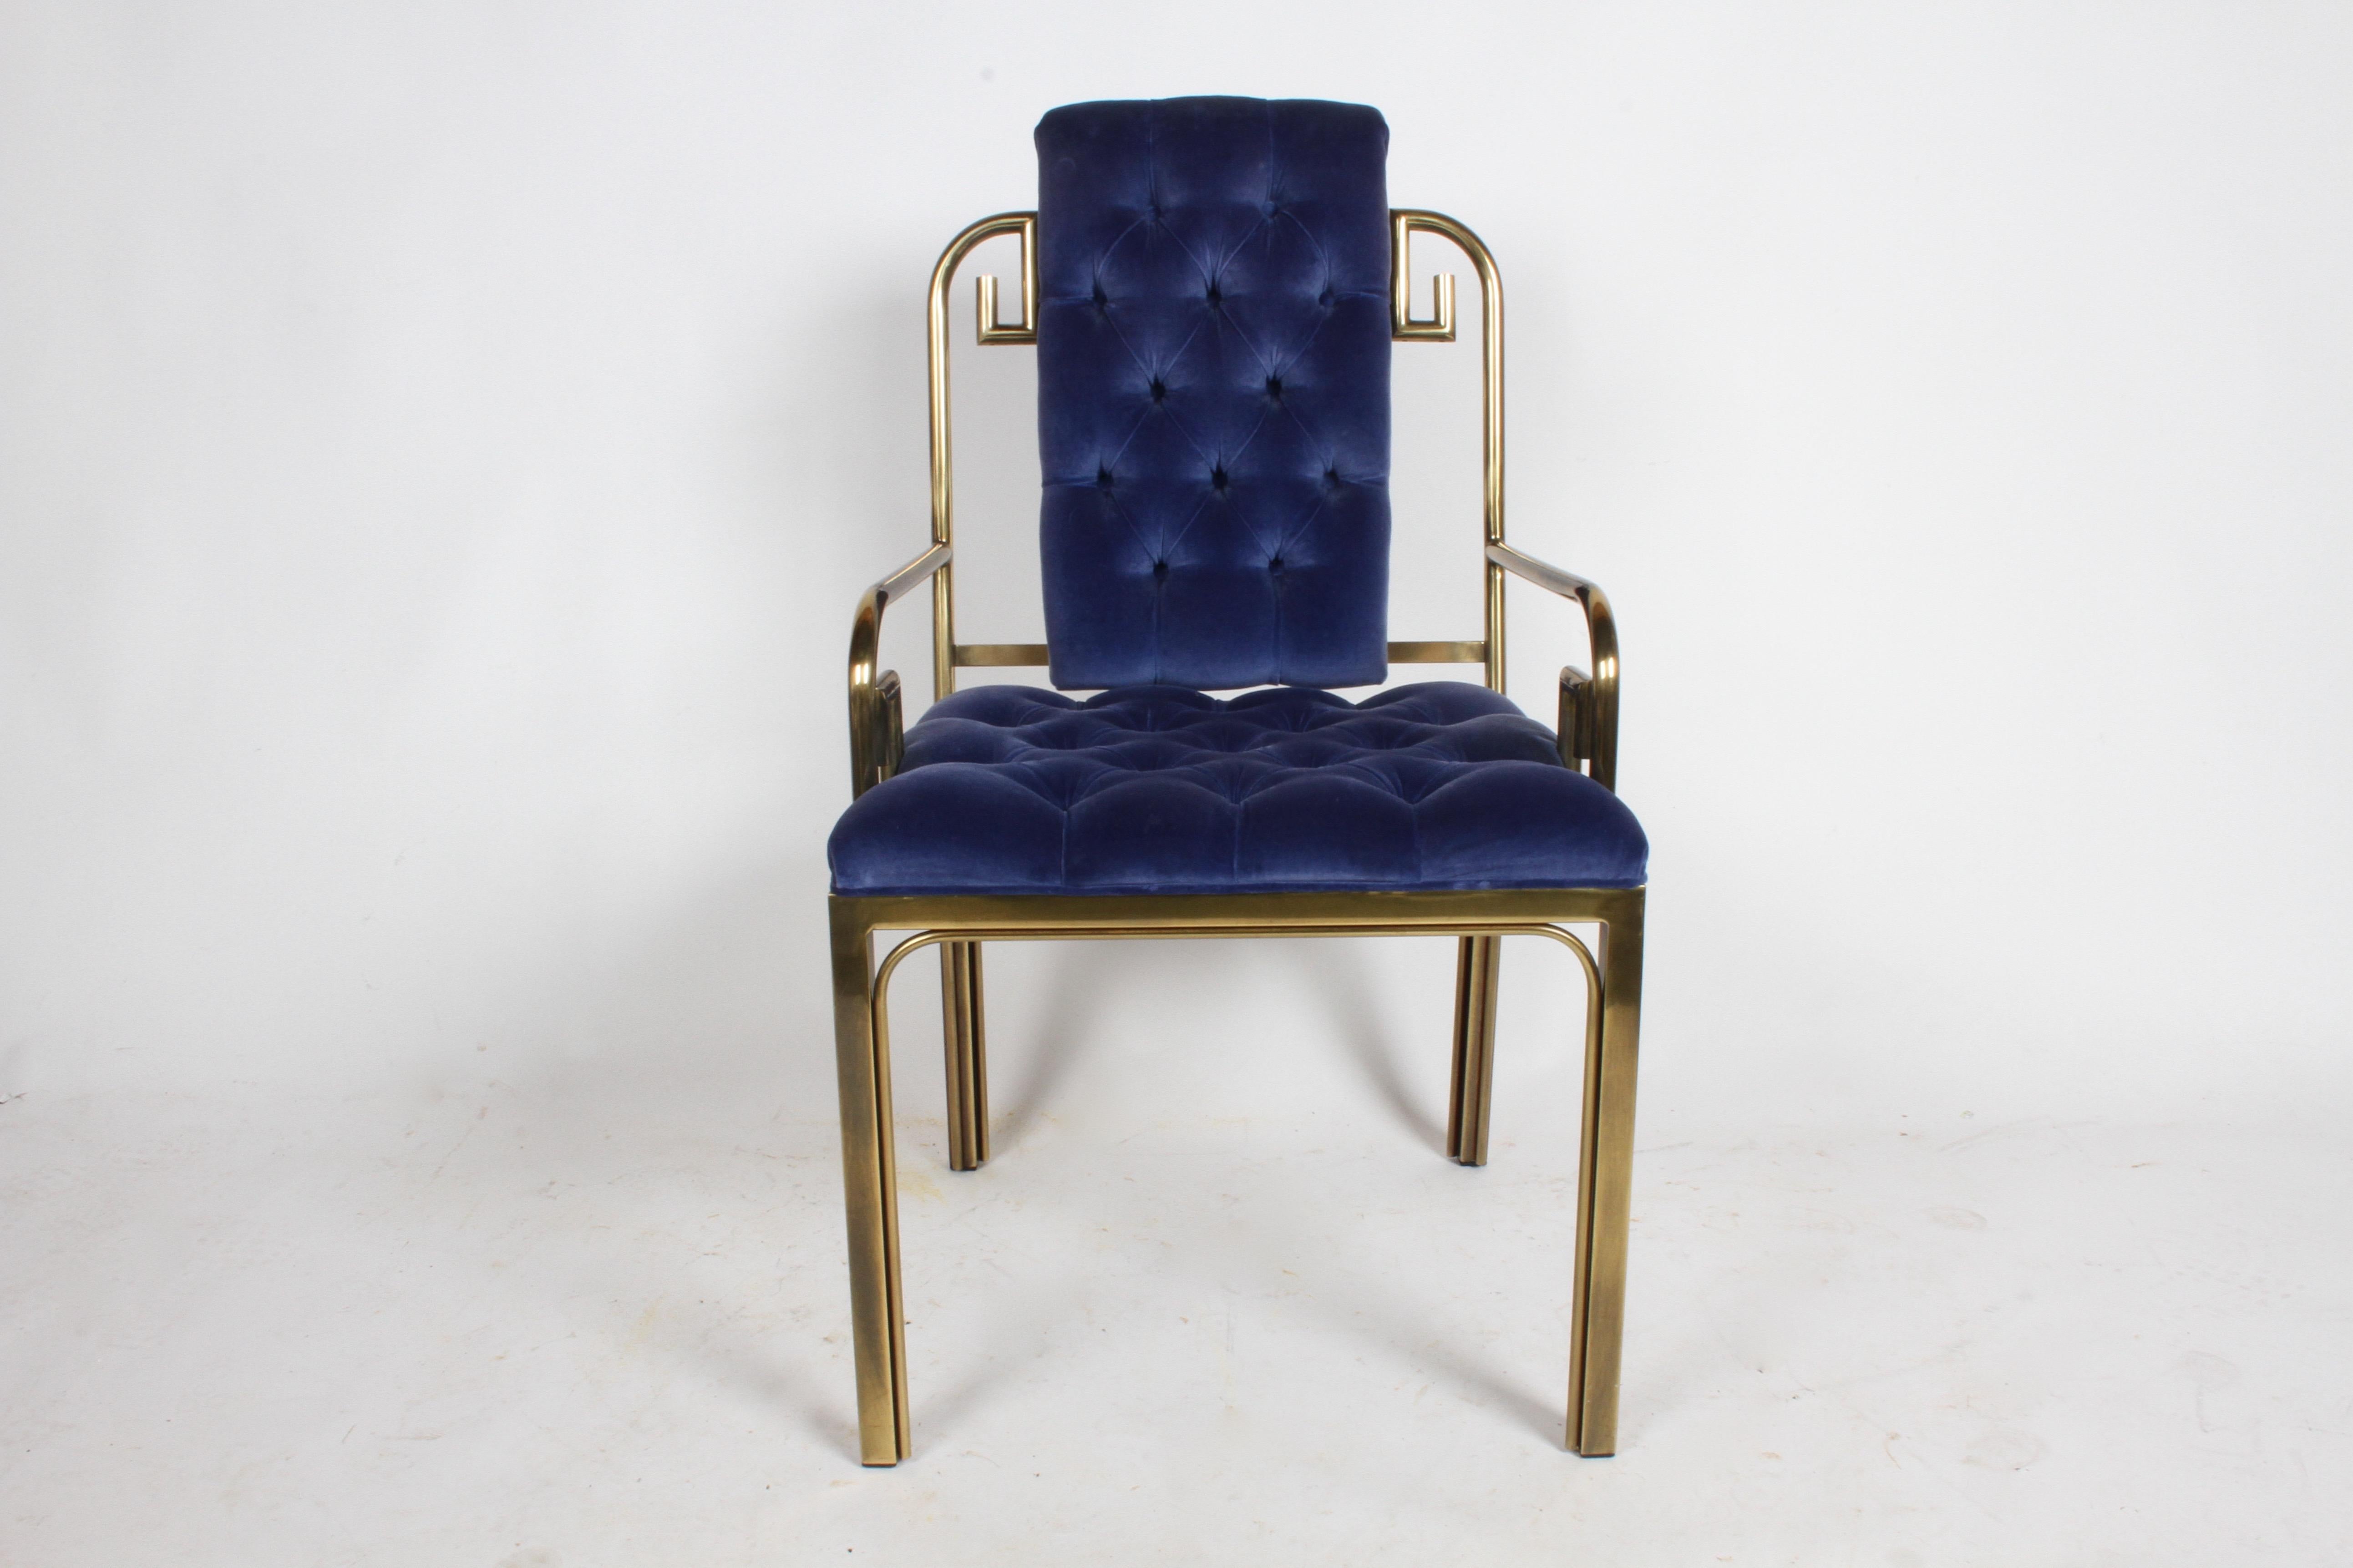 Beautiful matched set of eight brass frame Greek Key dining chairs by Mastercraft, circa 1970s. Shown with original blue velvet tufted seats, upholstery does have some stains. Should clean up okay, if professionally cleaned, if perfection is sought